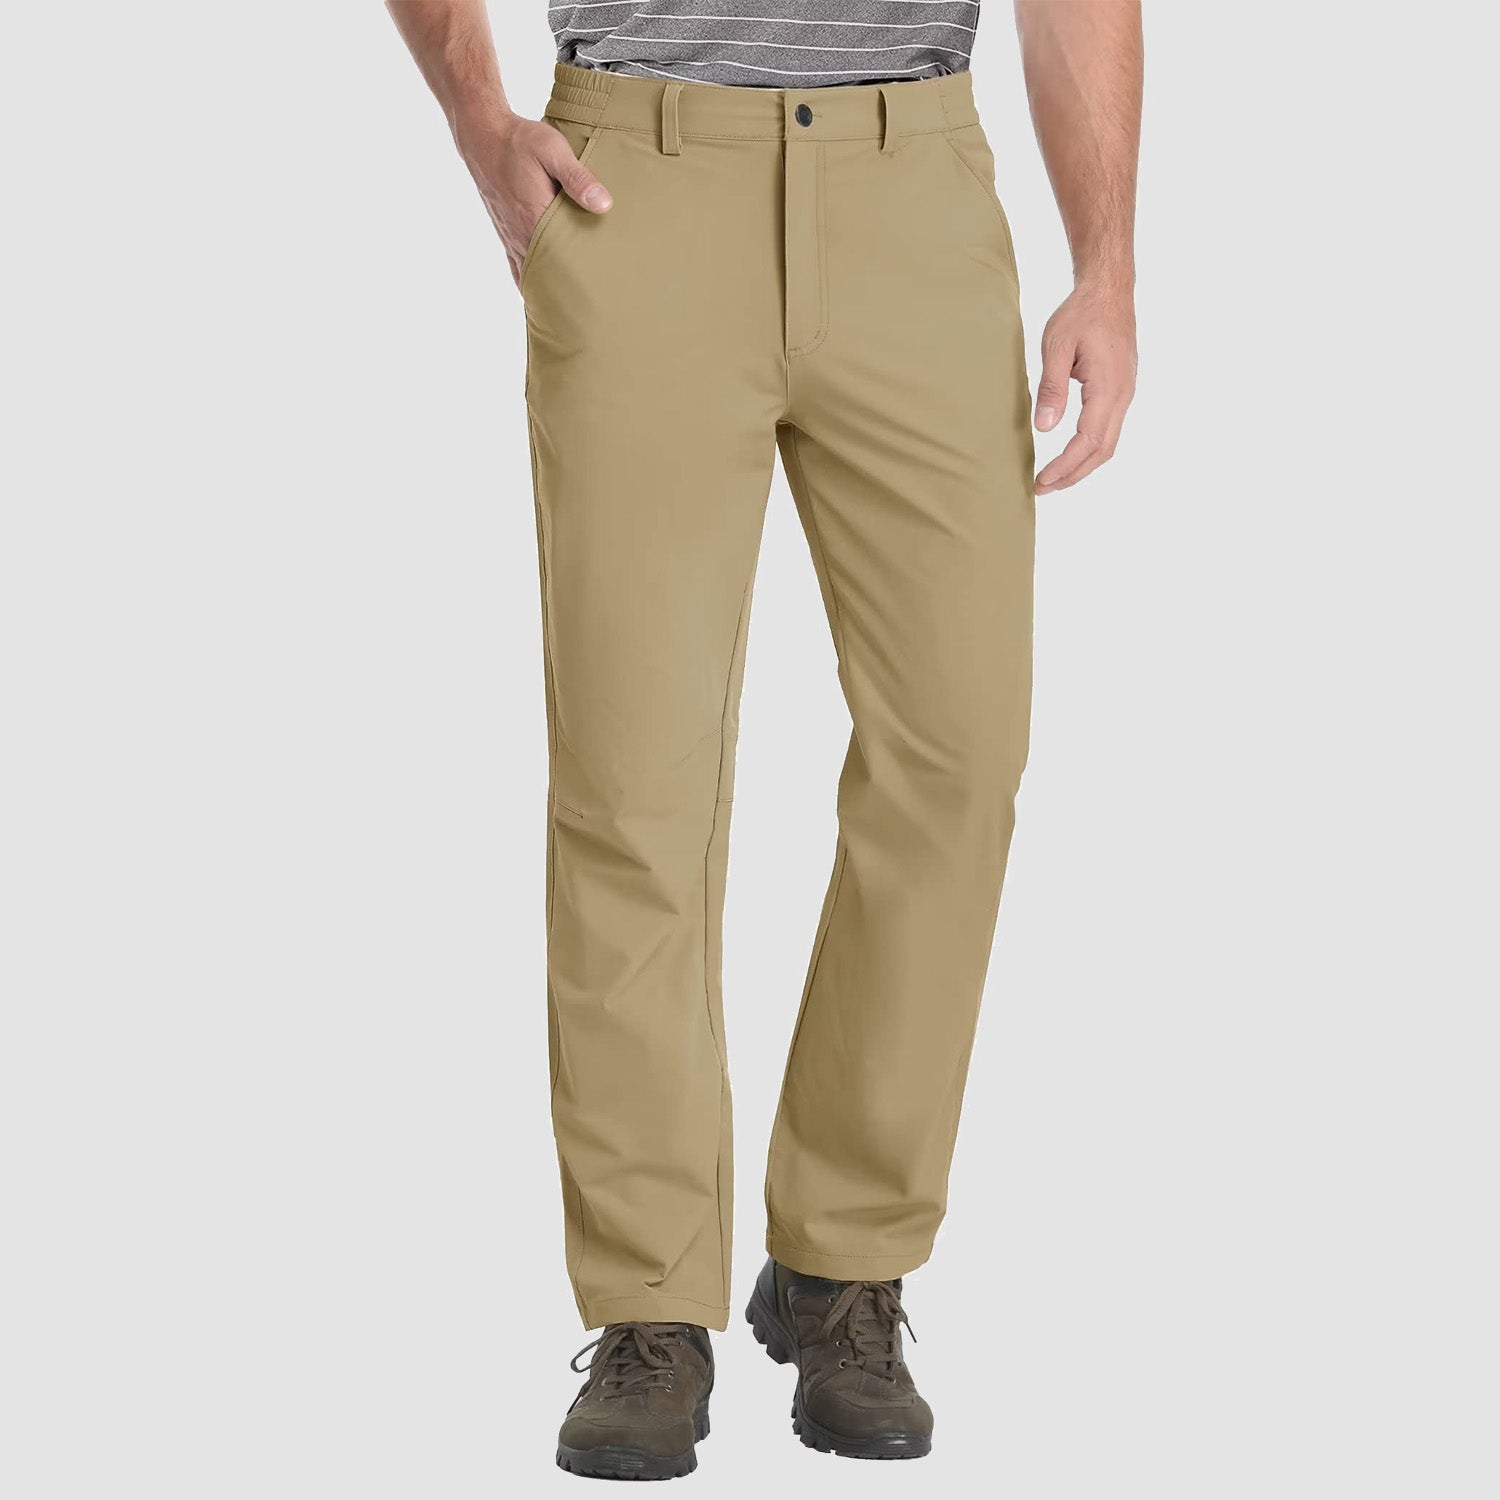 Men's Golf Pants Stretch Quick Dry Lightweight Hiking Pants with 3 Pockets